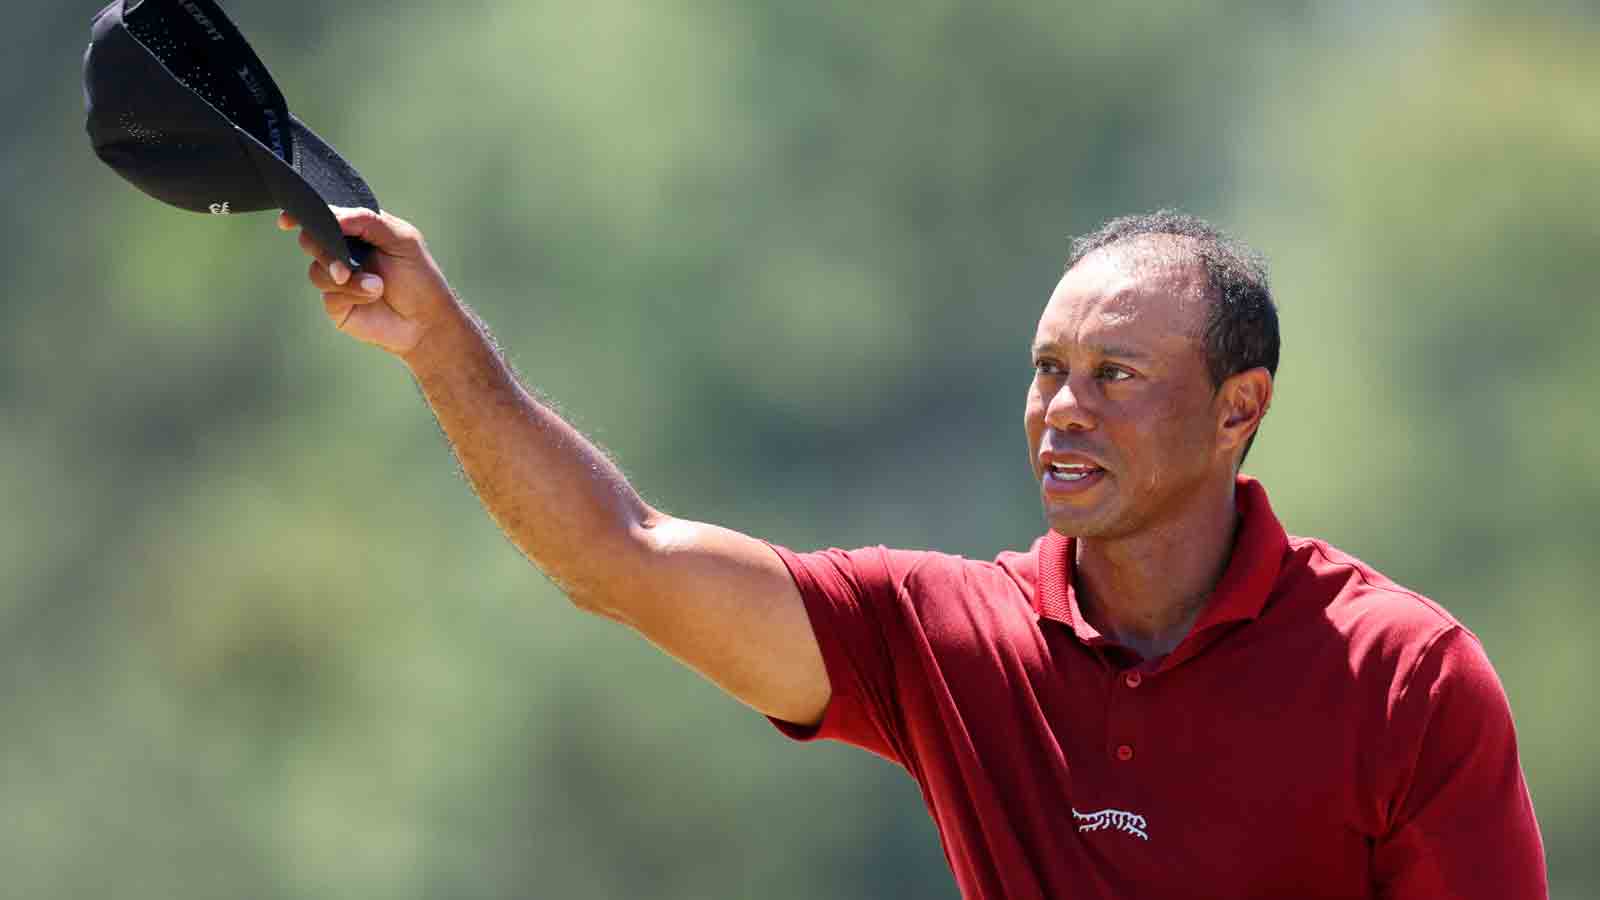 Did Tiger Woods shake hands with a tree? Social media reacts to viral
image